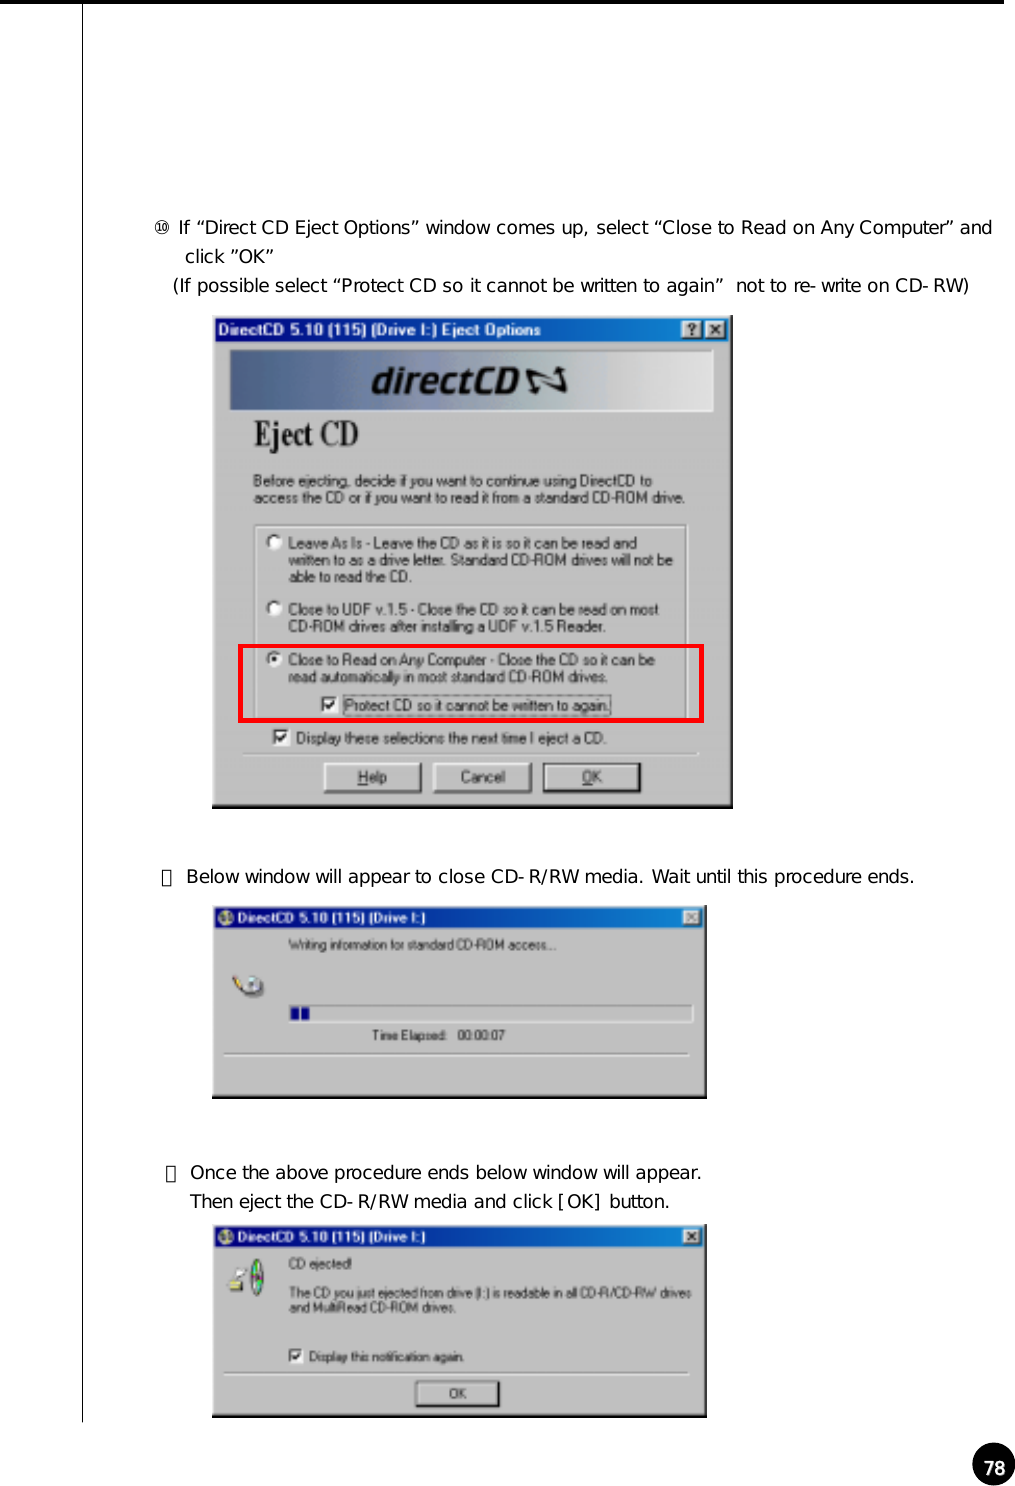 7878⑩ If “Direct CD Eject Options” window comes up, select “Close to Read on Any Computer” and click ”OK”(If possible select “Protect CD so it cannot be written to again” not to re-write on CD-RW)⑪ Below window will appear to close CD-R/RW media. Wait until this procedure ends.⑫ Once the above procedure ends below window will appear. Then eject the CD-R/RW media and click [OK] button.